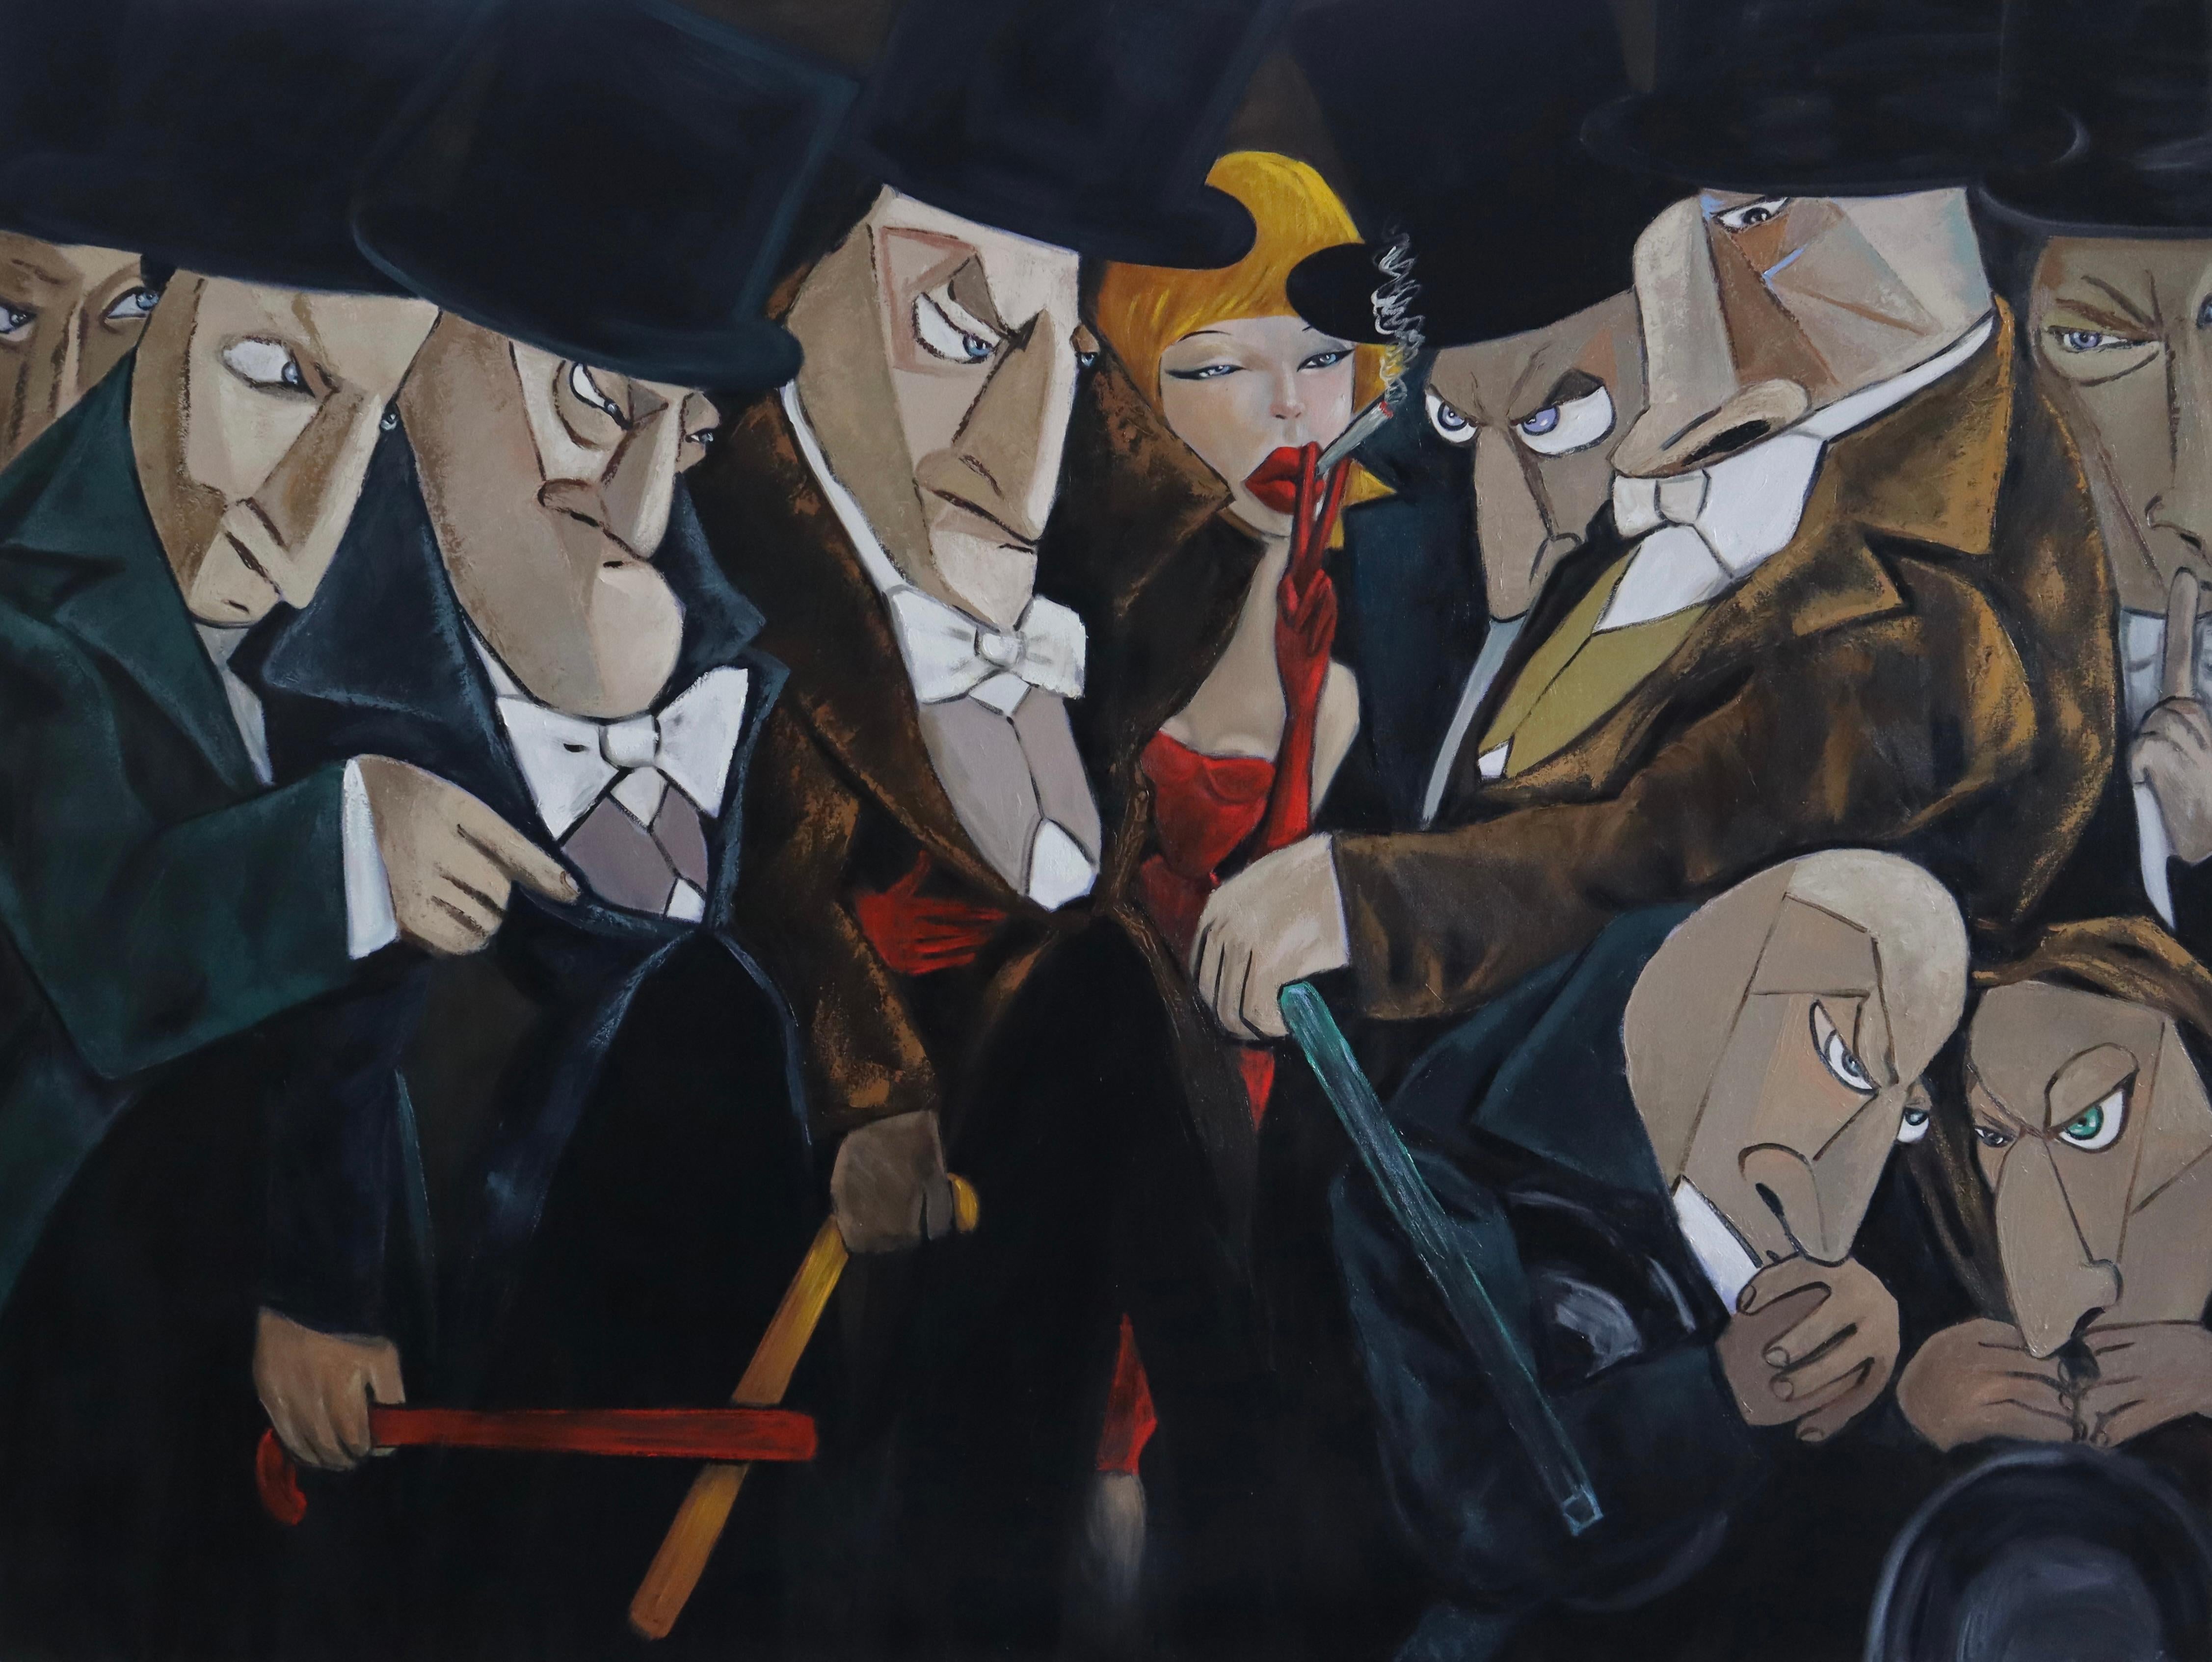 Oil painting by Ta Byrne I love painting people, but I don’t want to paint portraits, I want my people to have a bit of character, a little of the night about them I want them to be unique.

A crowd of men dressed up in top hat and tails, each with